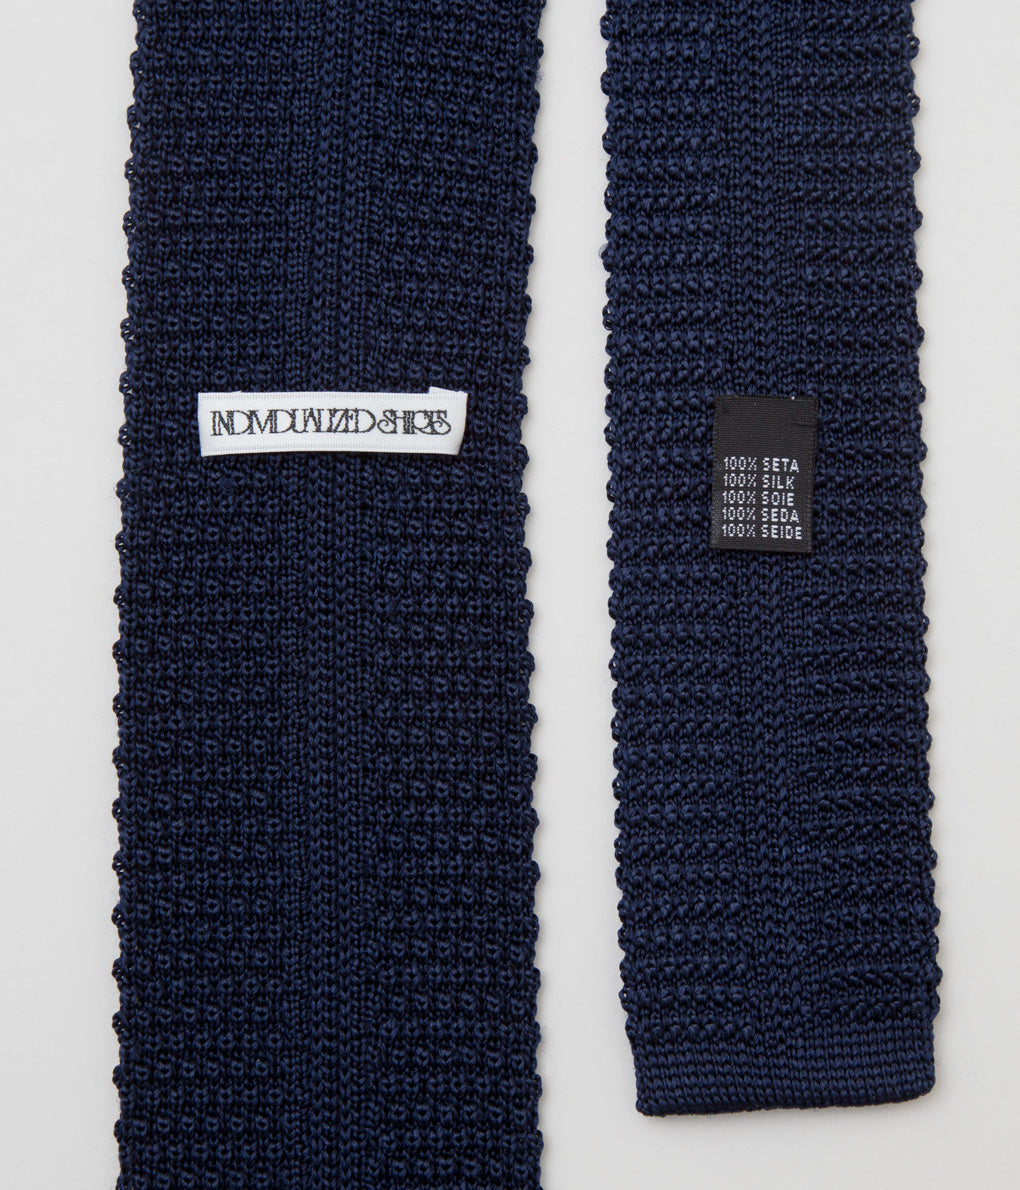 INDIVIDUALIZED ACCESSORIES "KNIT TIE" (NAVY)